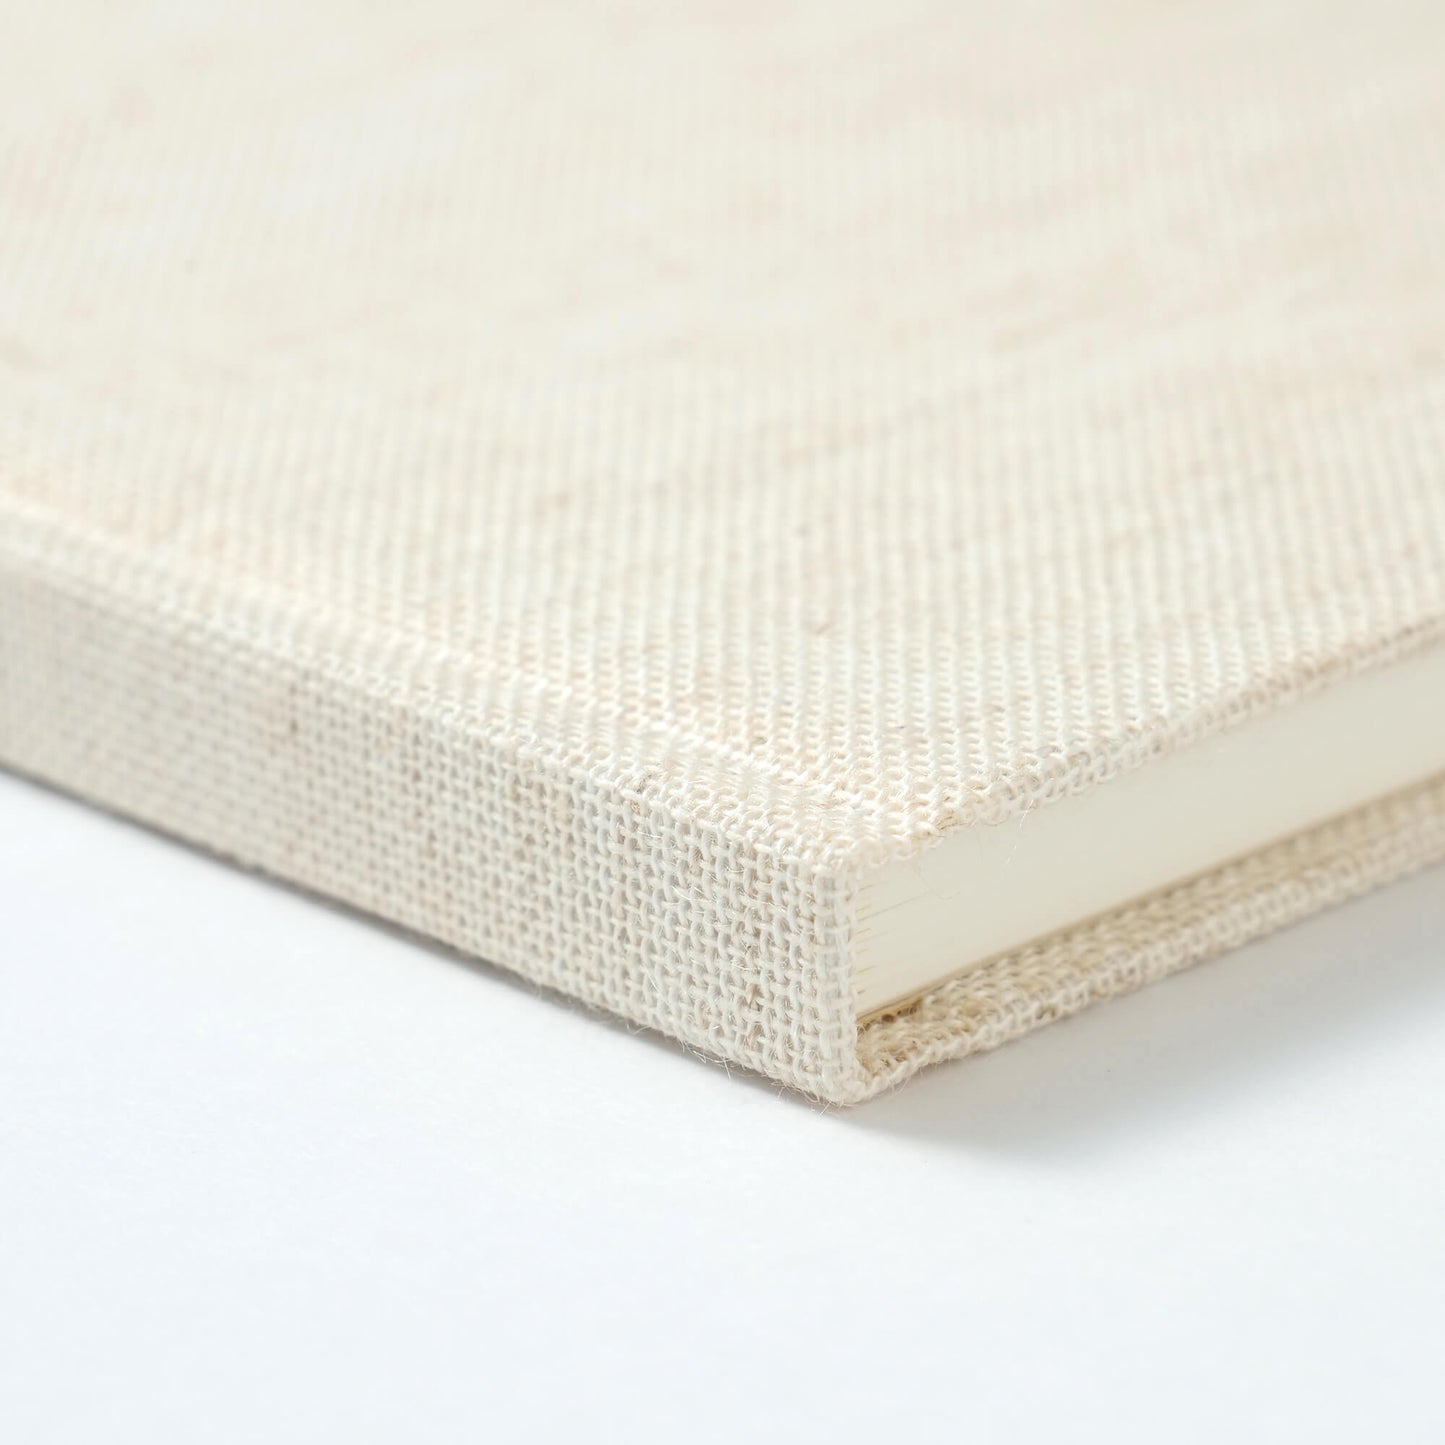 A5 Square Grid Linen Hardcover Notebook - Beige